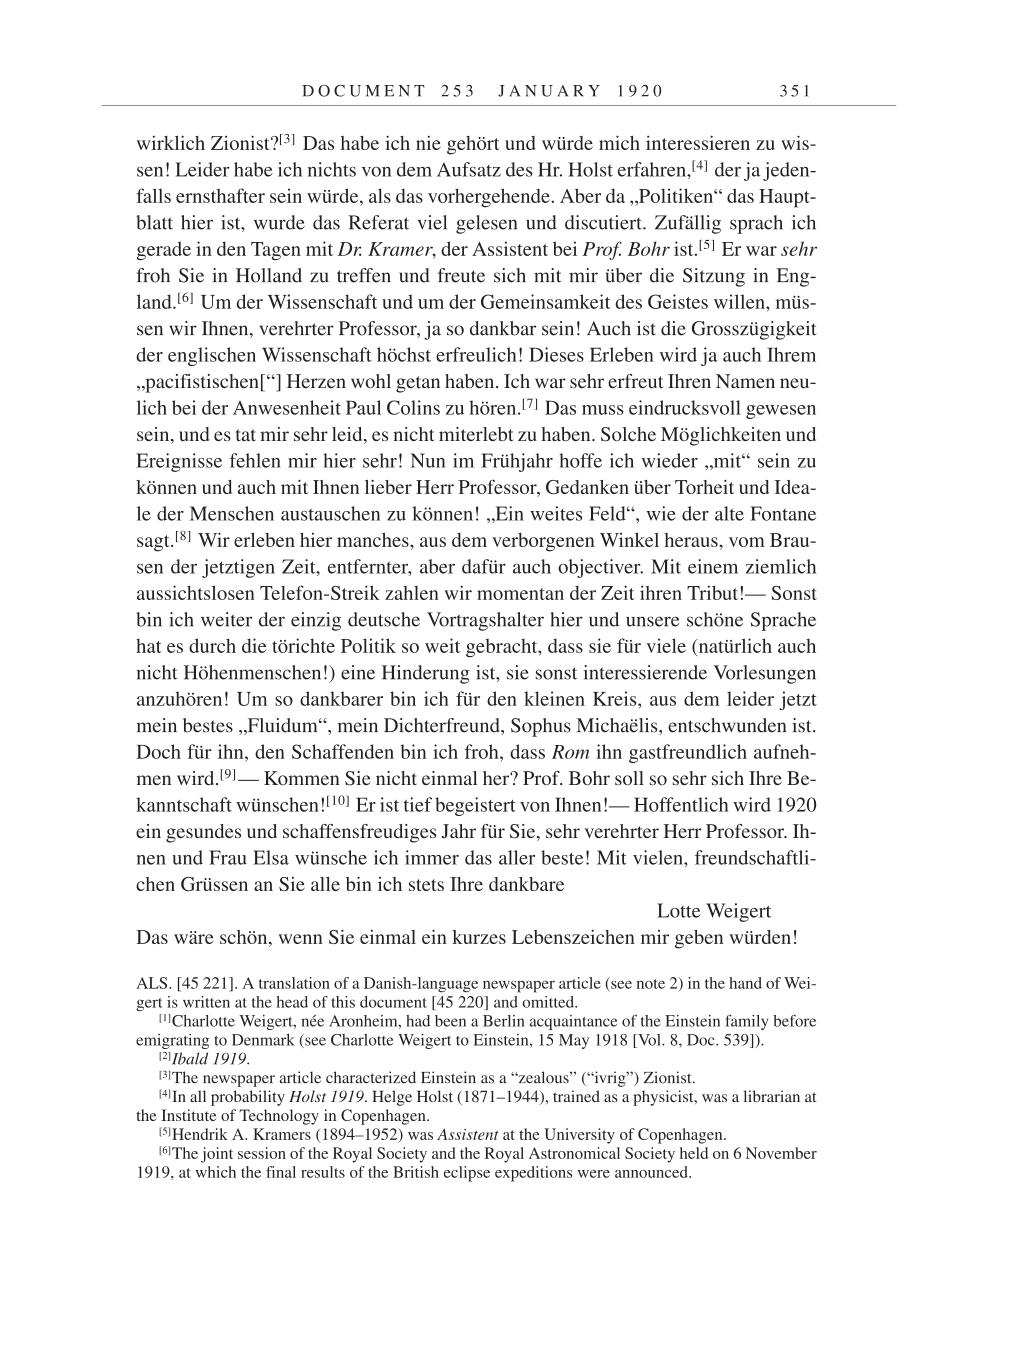 Volume 9: The Berlin Years: Correspondence January 1919-April 1920 page 351